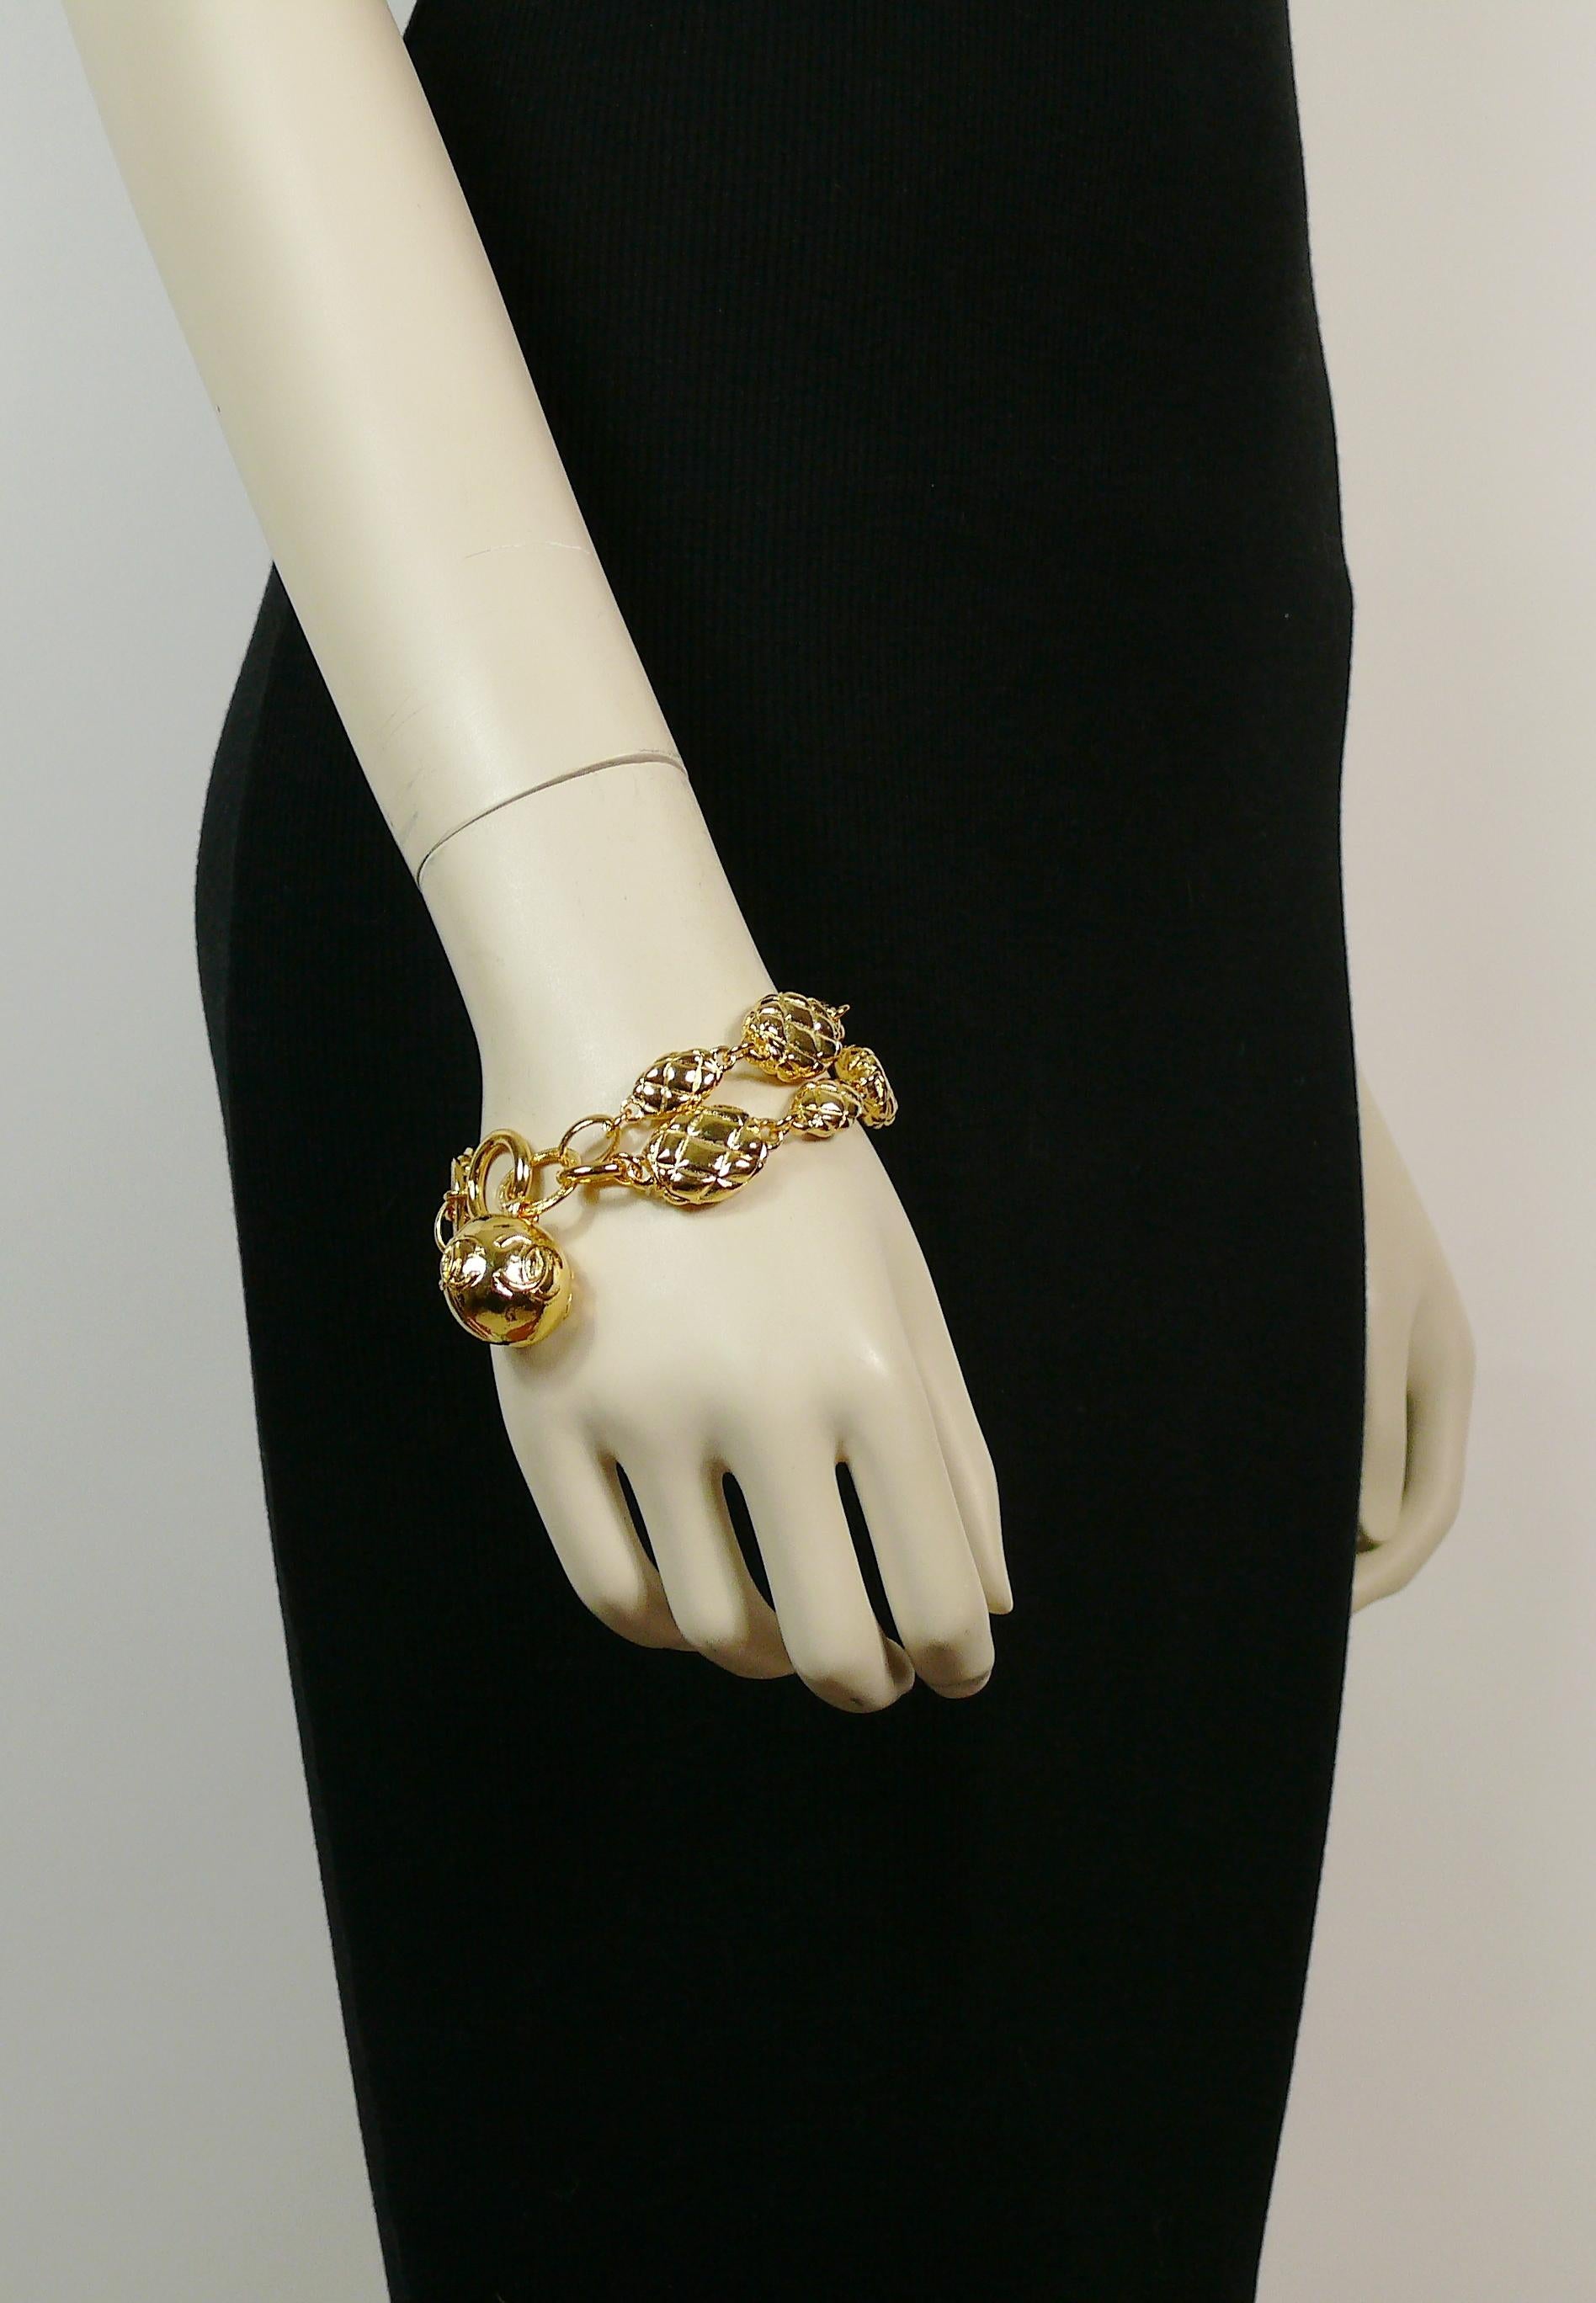 CHANEL vintage gold toned bracelet featuring two tiered of quilted links and a dangling ball charm with CC logos at the end of the chain.

Spring clasp and toggle closure.

Marked CHANEL and dated 1985.

Indicative measurements : length approx. 21